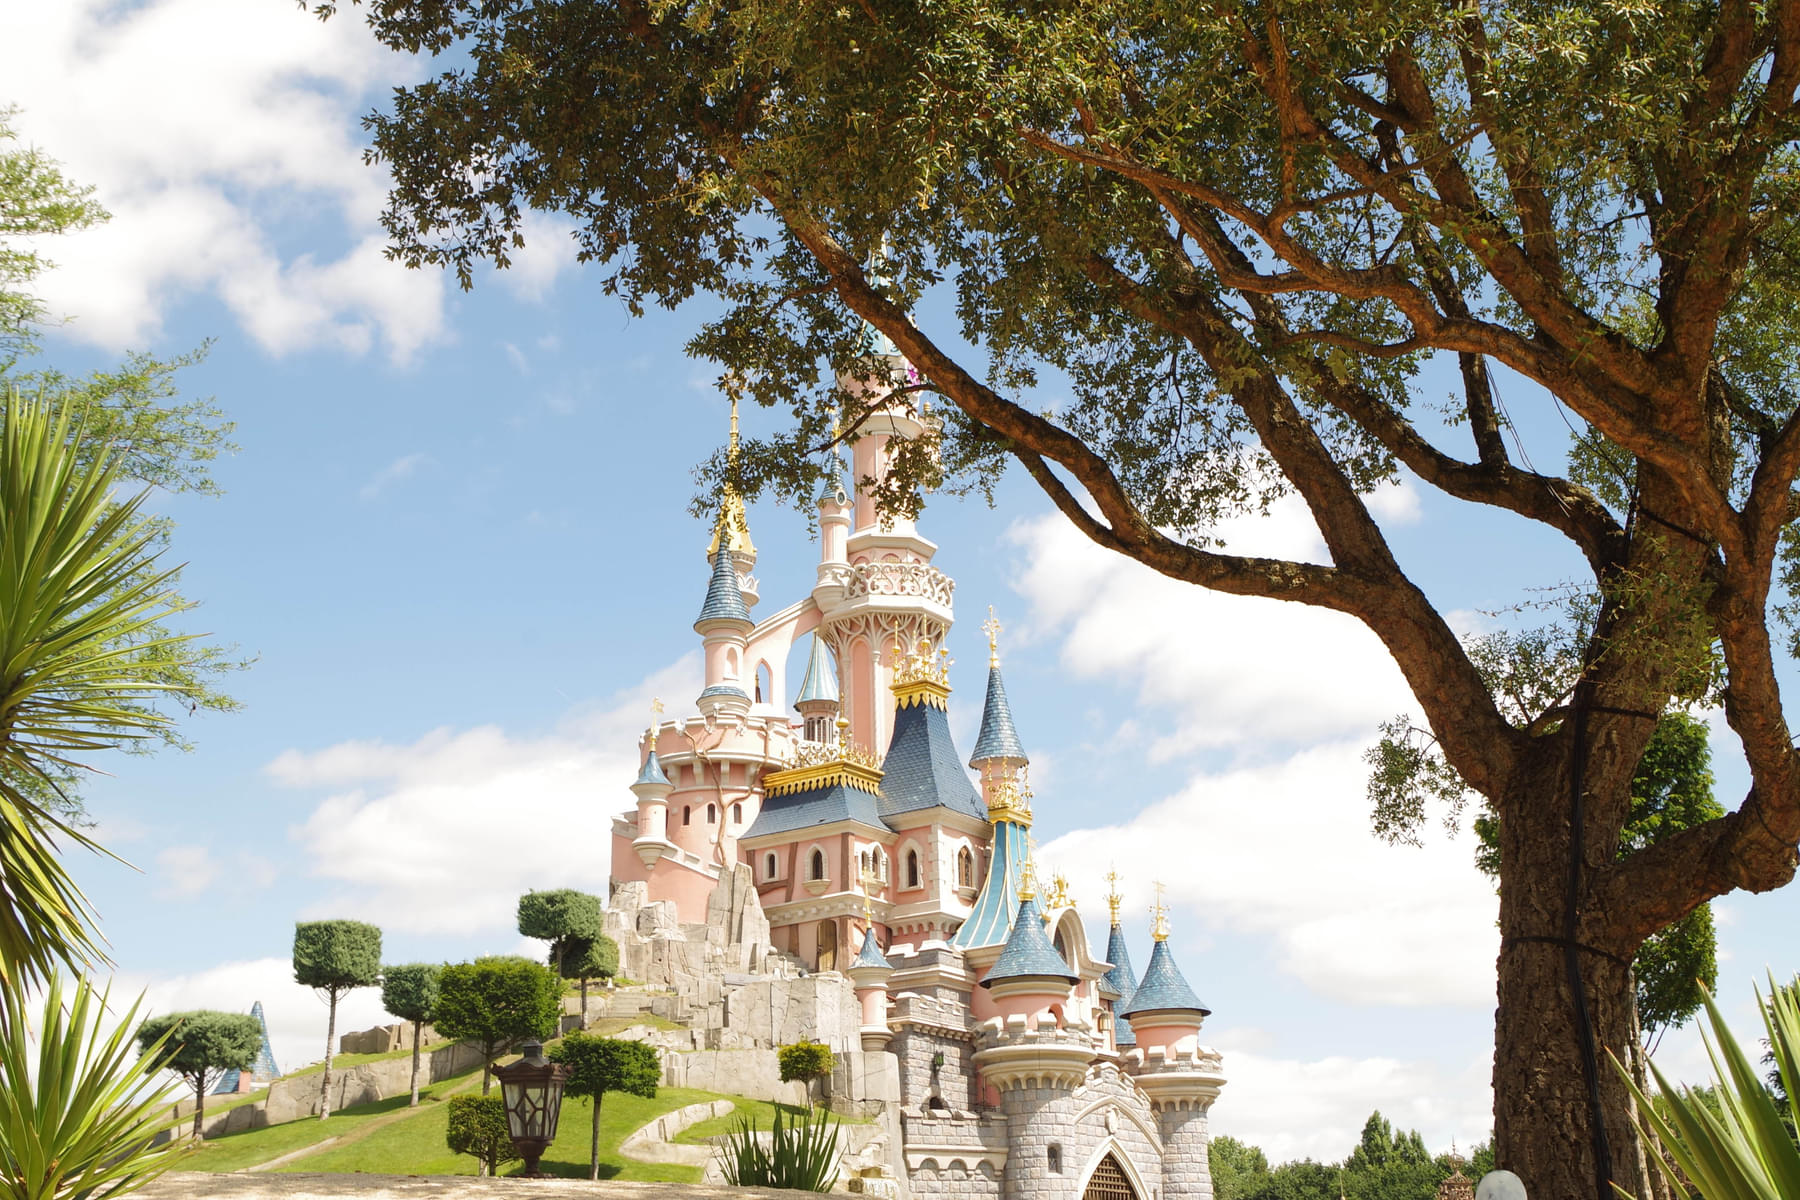 Step inside the Disneyland Paris home to meet all amazing Disney characters